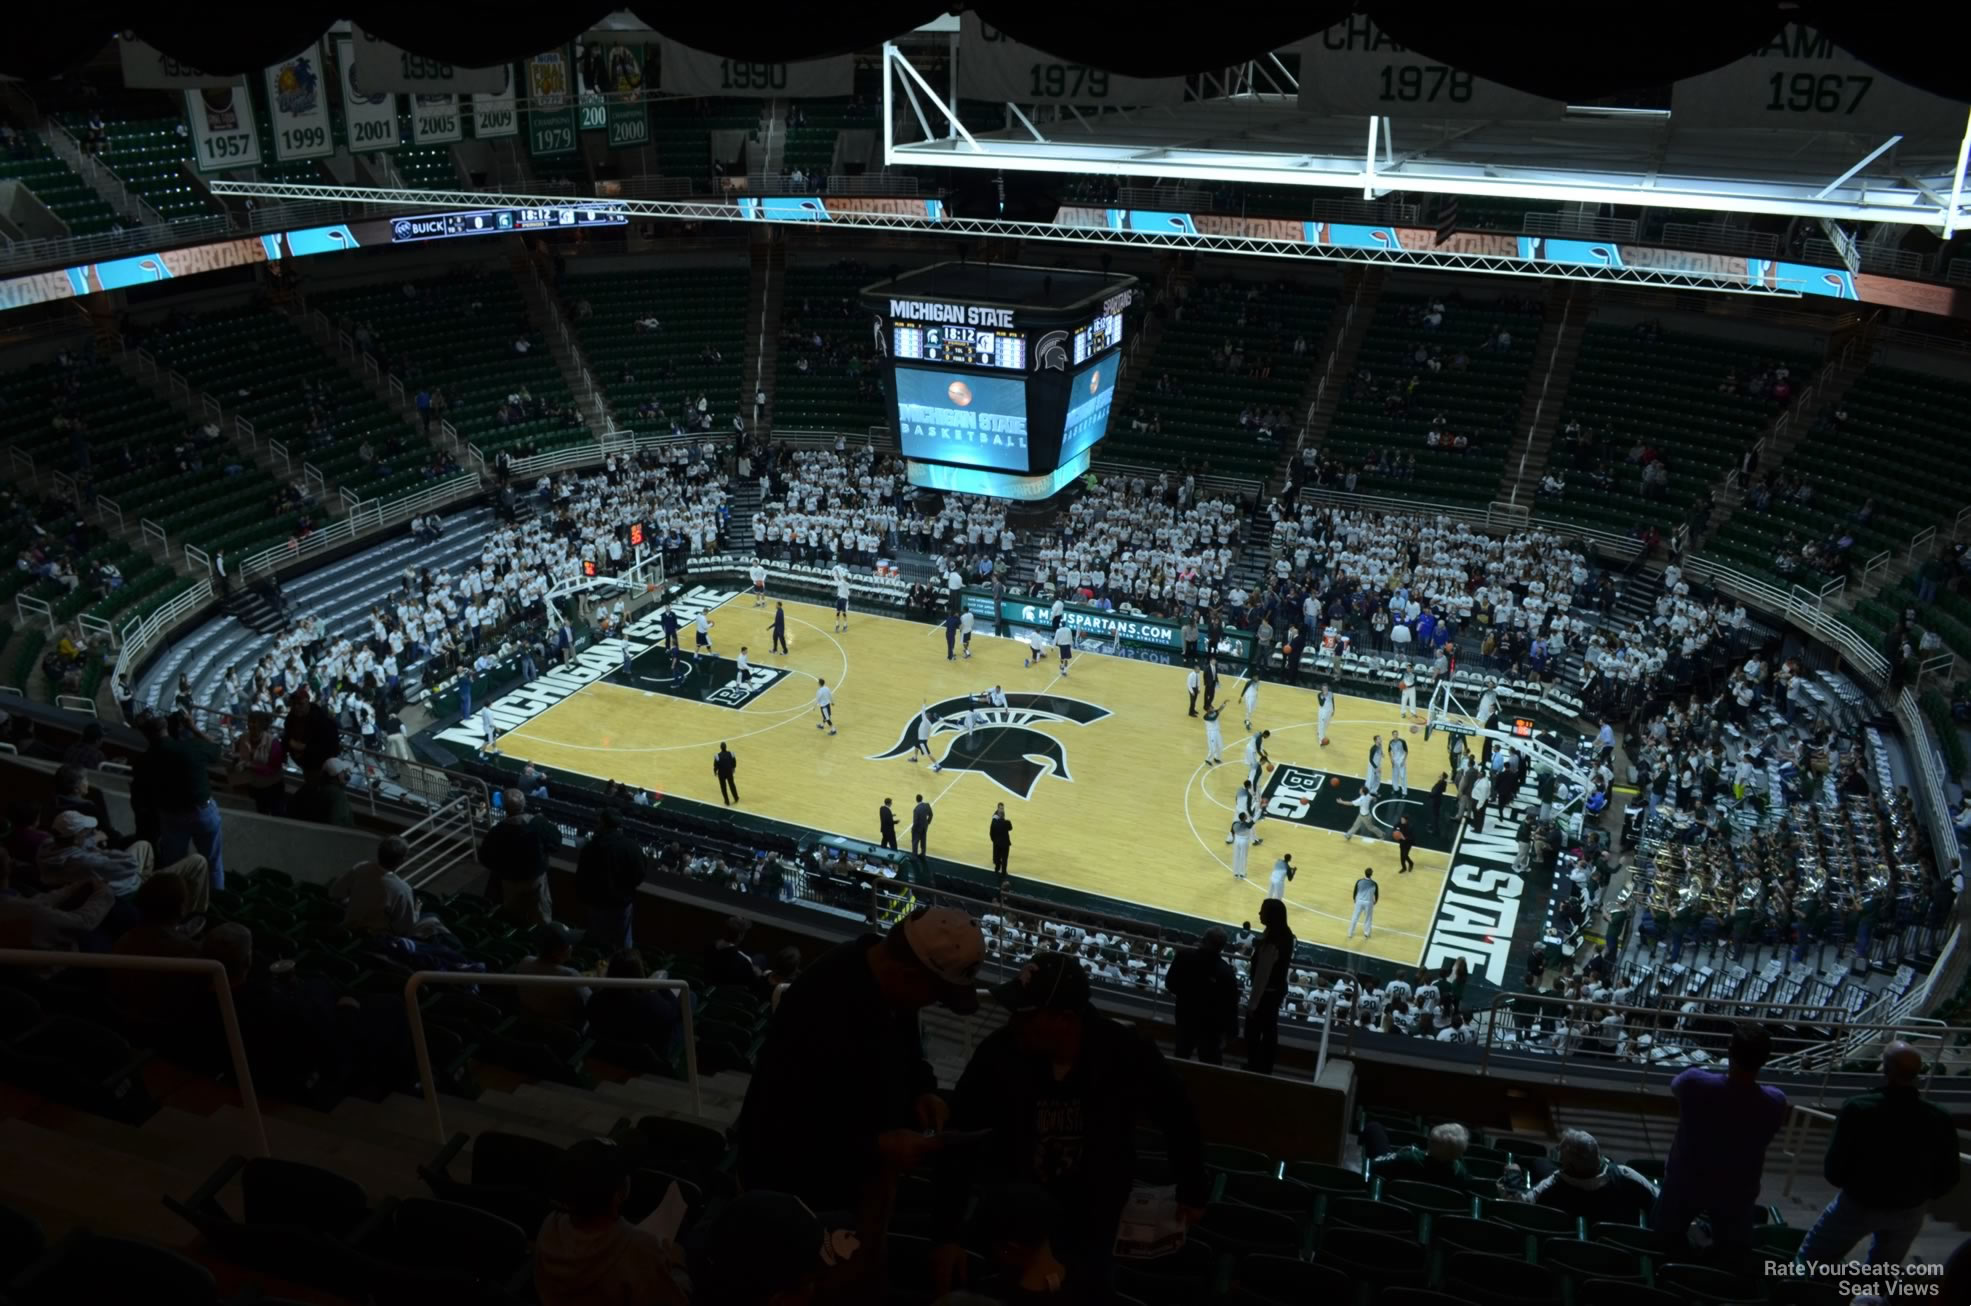 section 225, row 15 seat view  - breslin center